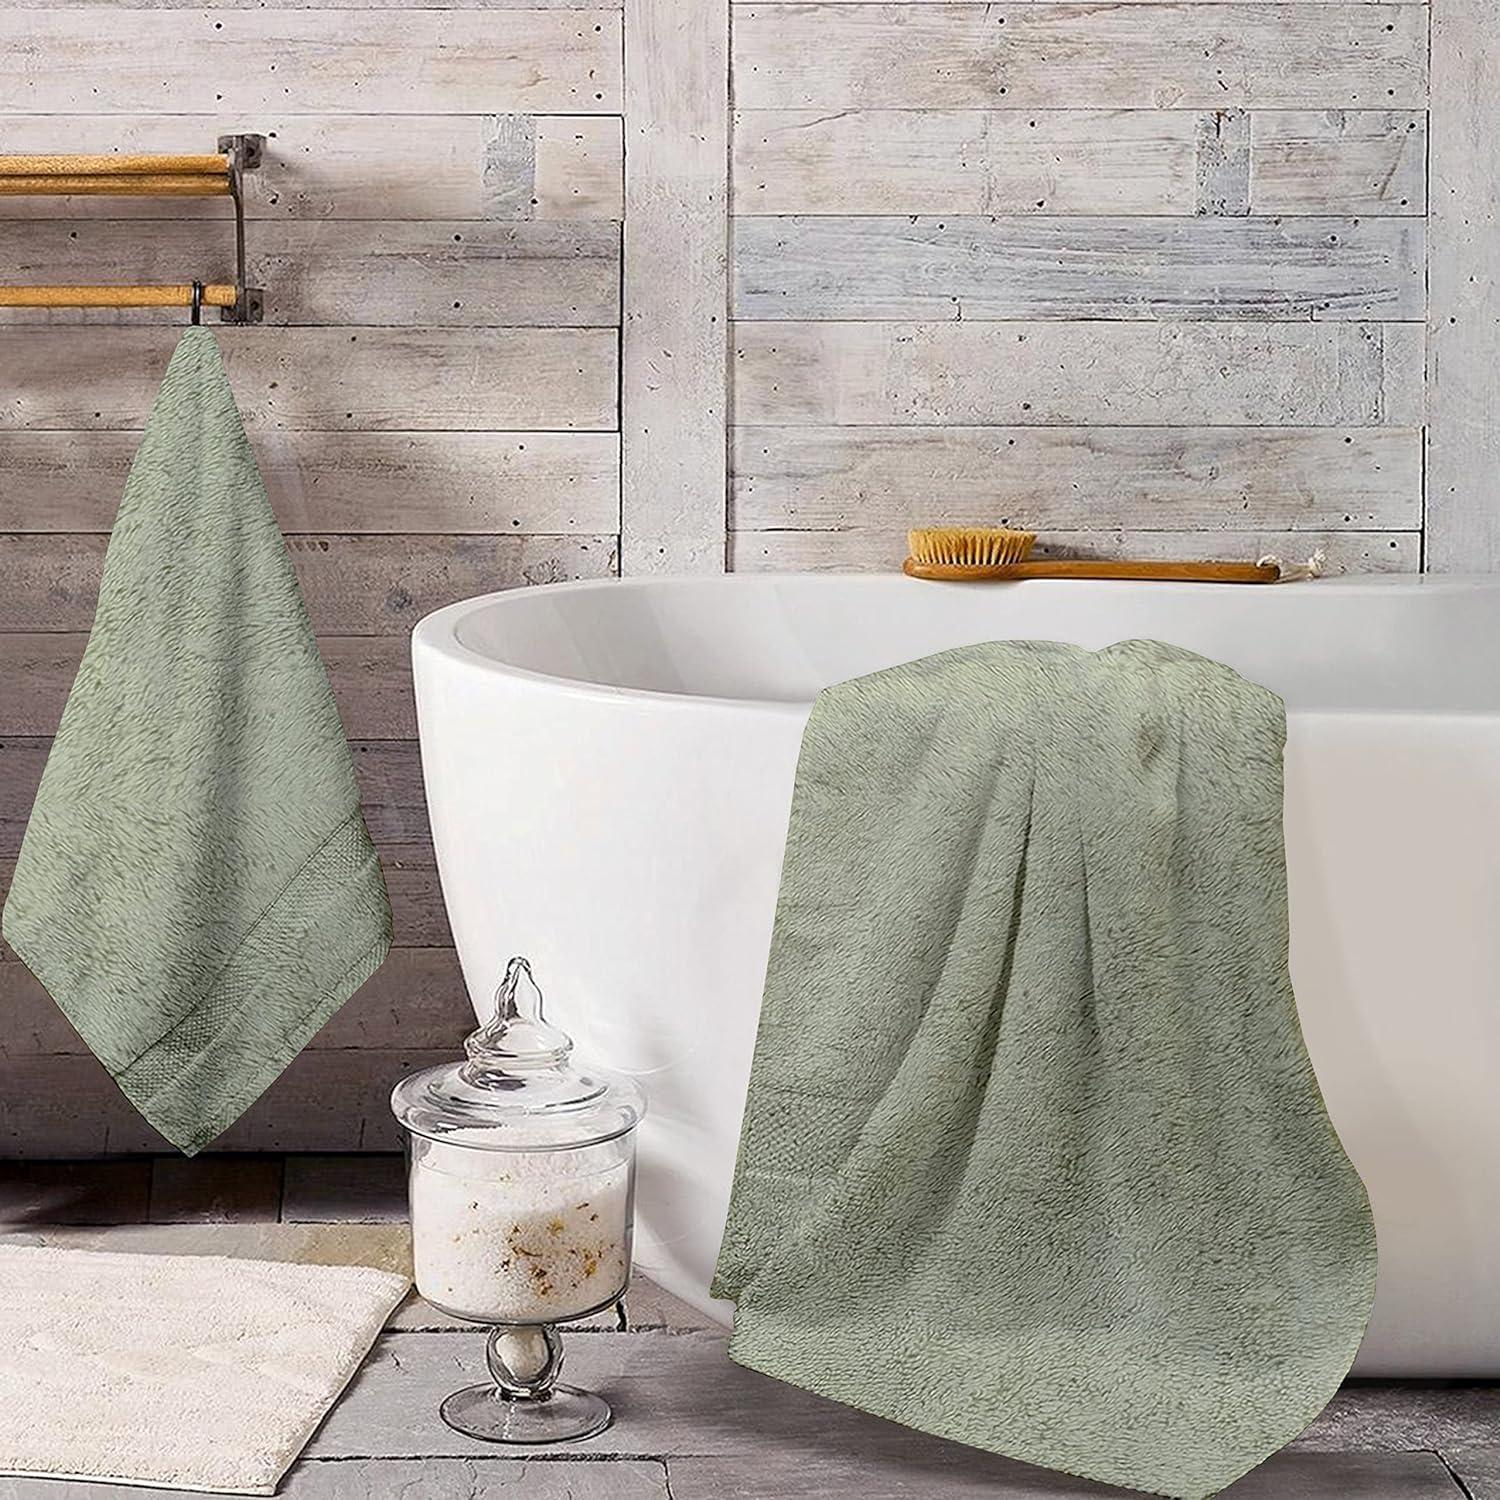 Bath Towels Set Bathroom Soft Feel Highly Absorbent Shower Face High  Quality NEW